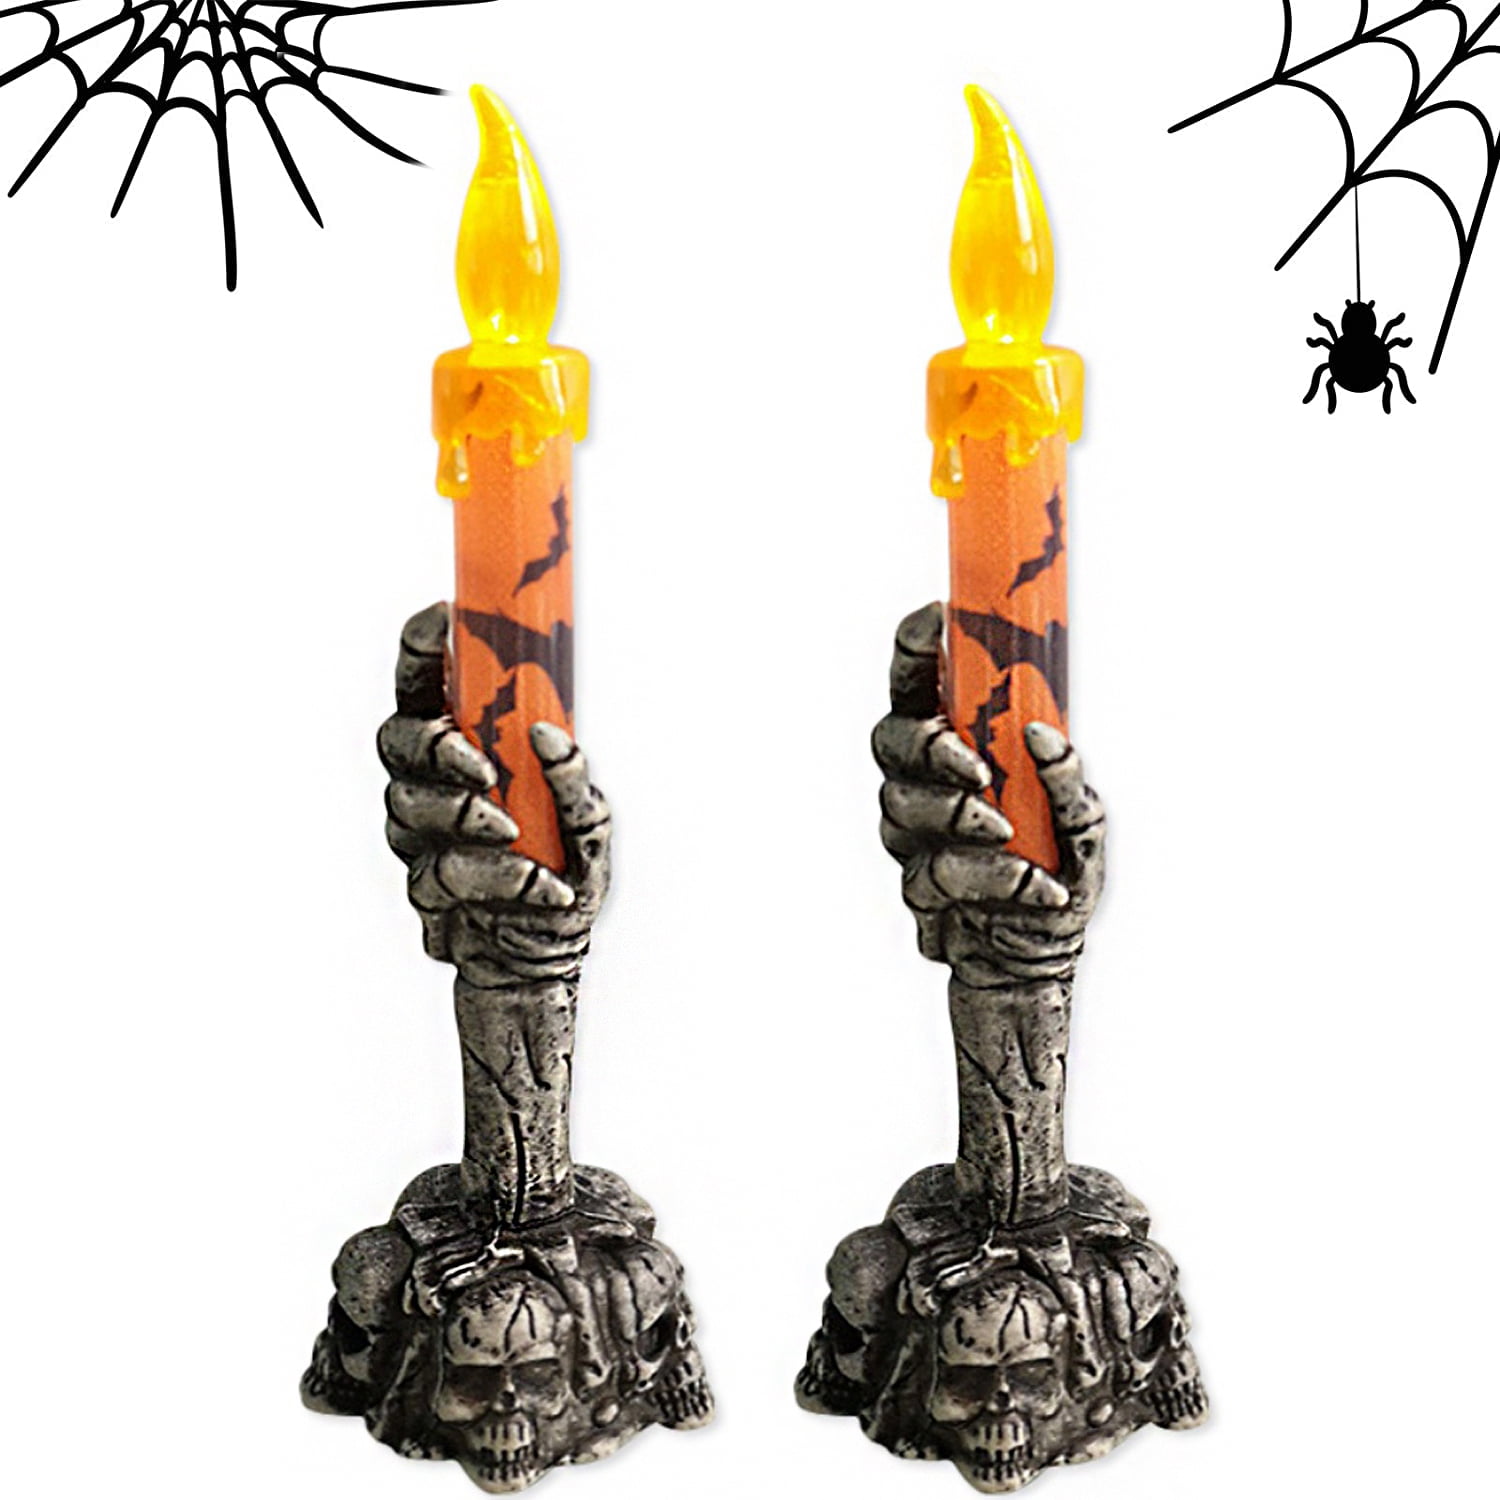 Fun Costumes Ancient Skull Candle Decoration with Red Light Up Eyes, Spooky Creepy Halloween Decor Flameless Battery Operated